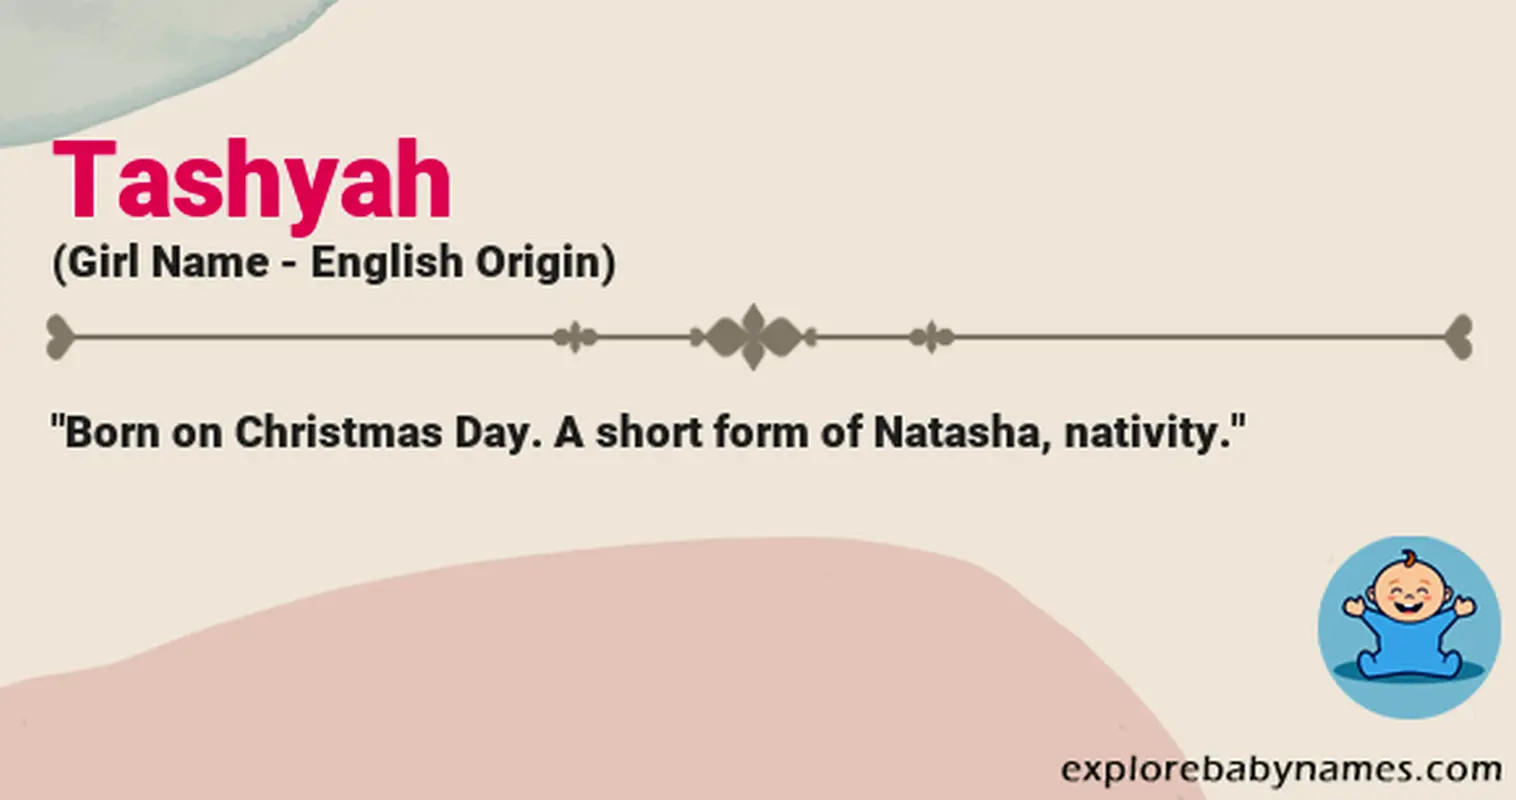 Meaning of Tashyah